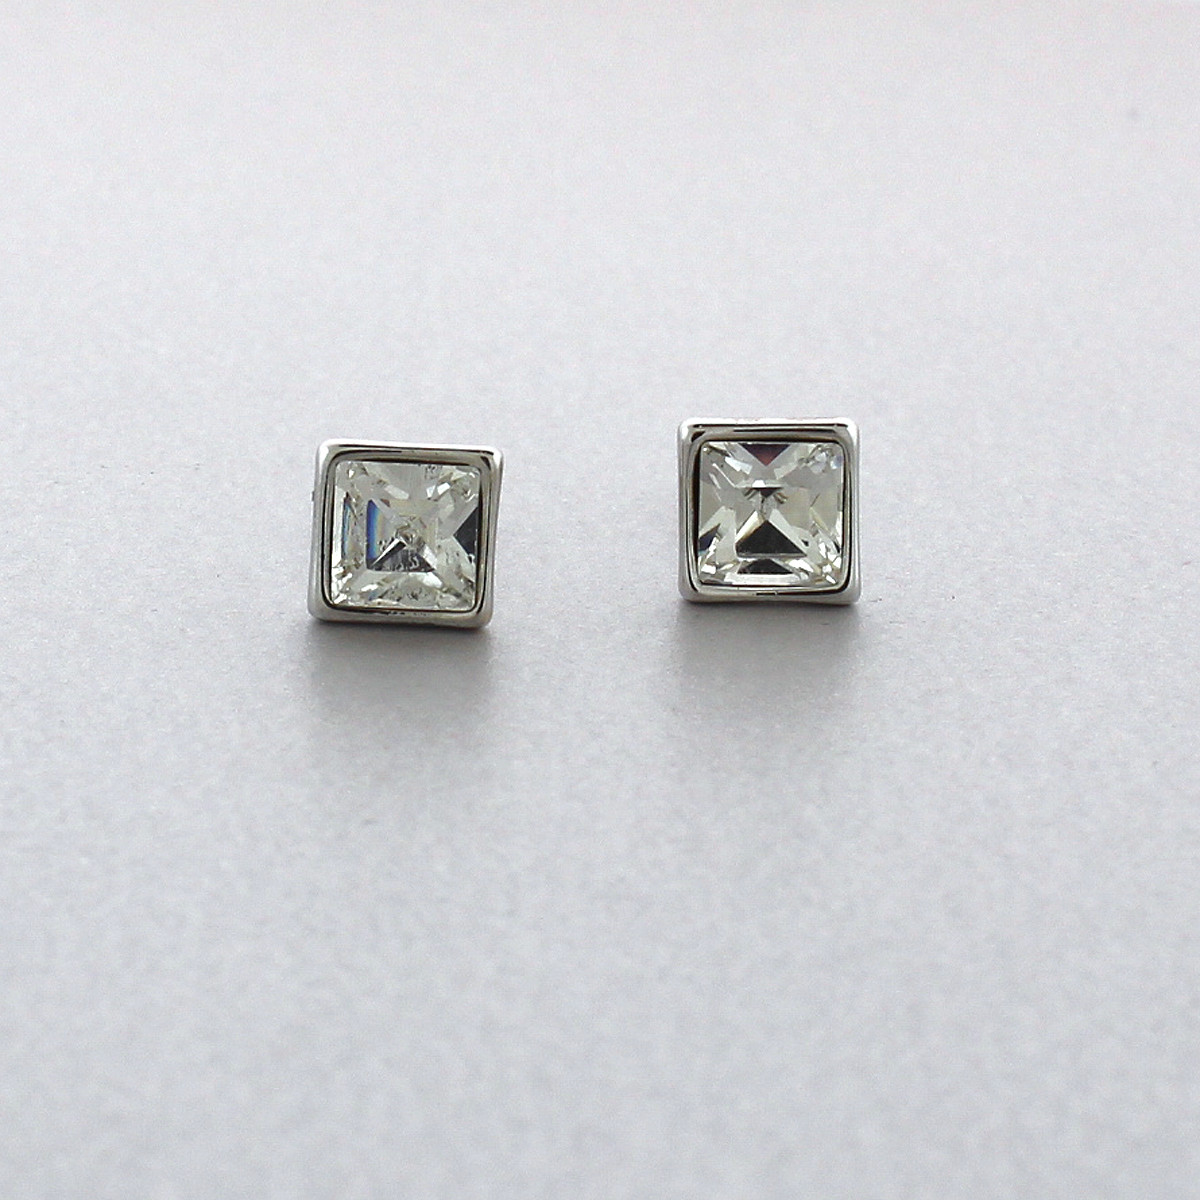 Stud Earrings Made with Crystals in Brass - Artune Jewelry Online